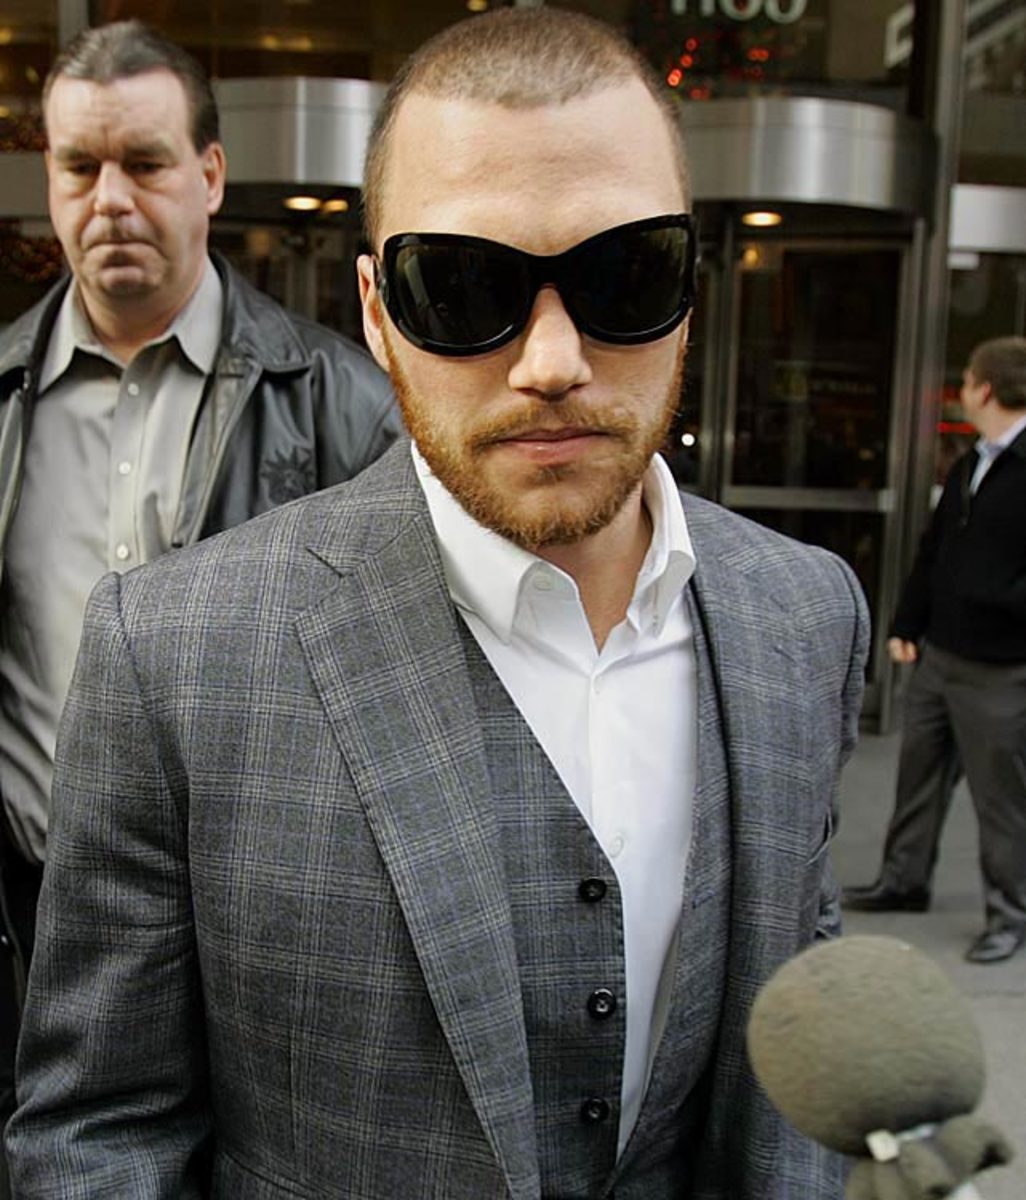 Sean Avery Is Representing Himself in Court. The Judge Advised